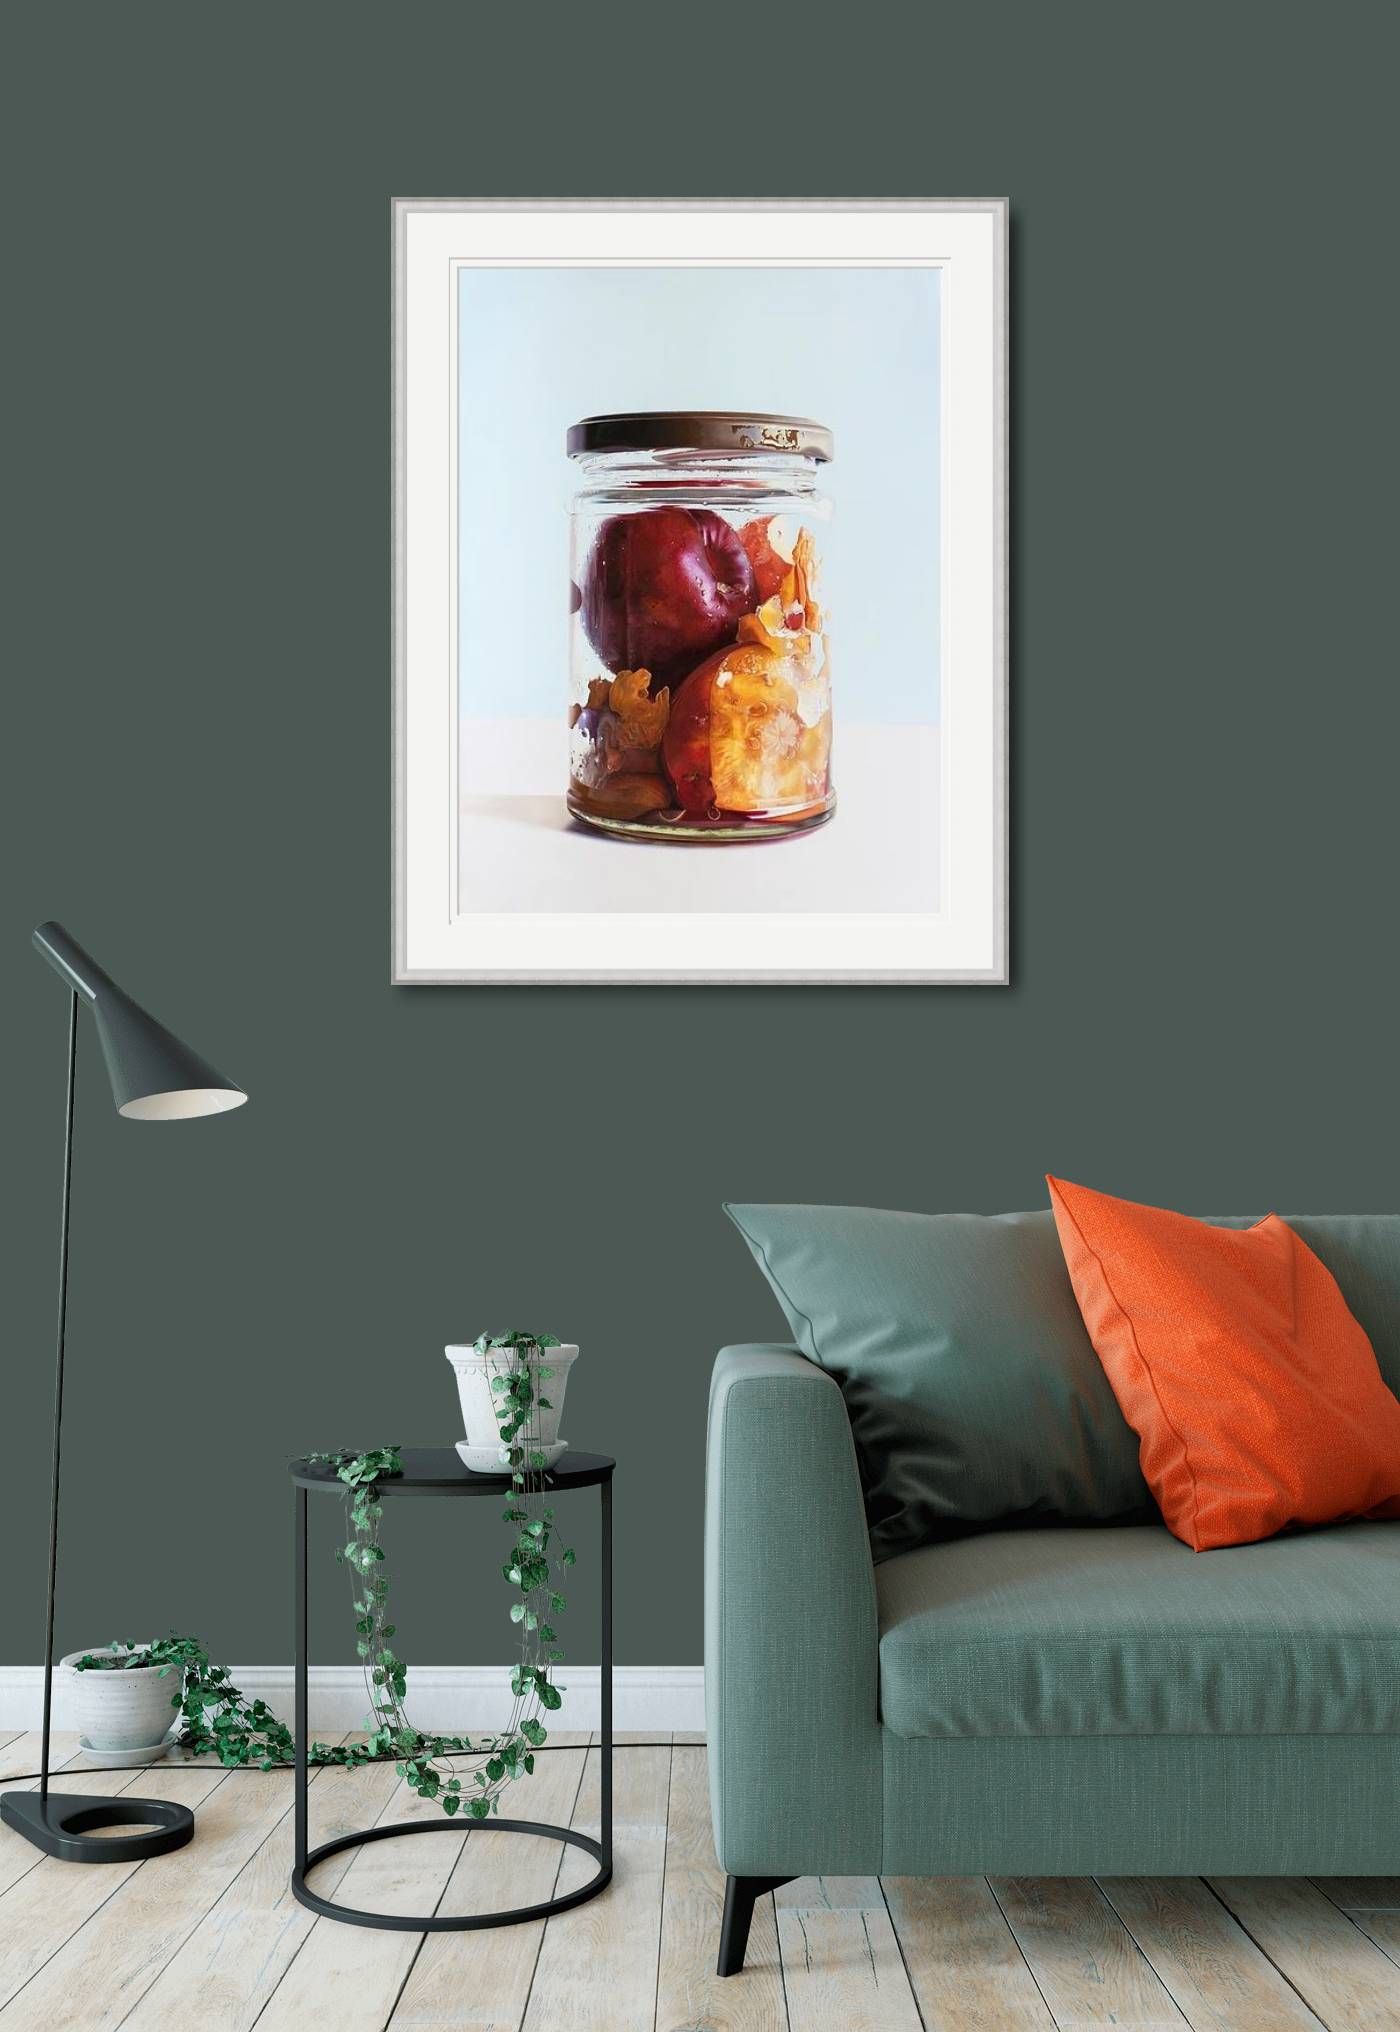 Small  - Plums in Jar by Stephen Johntson